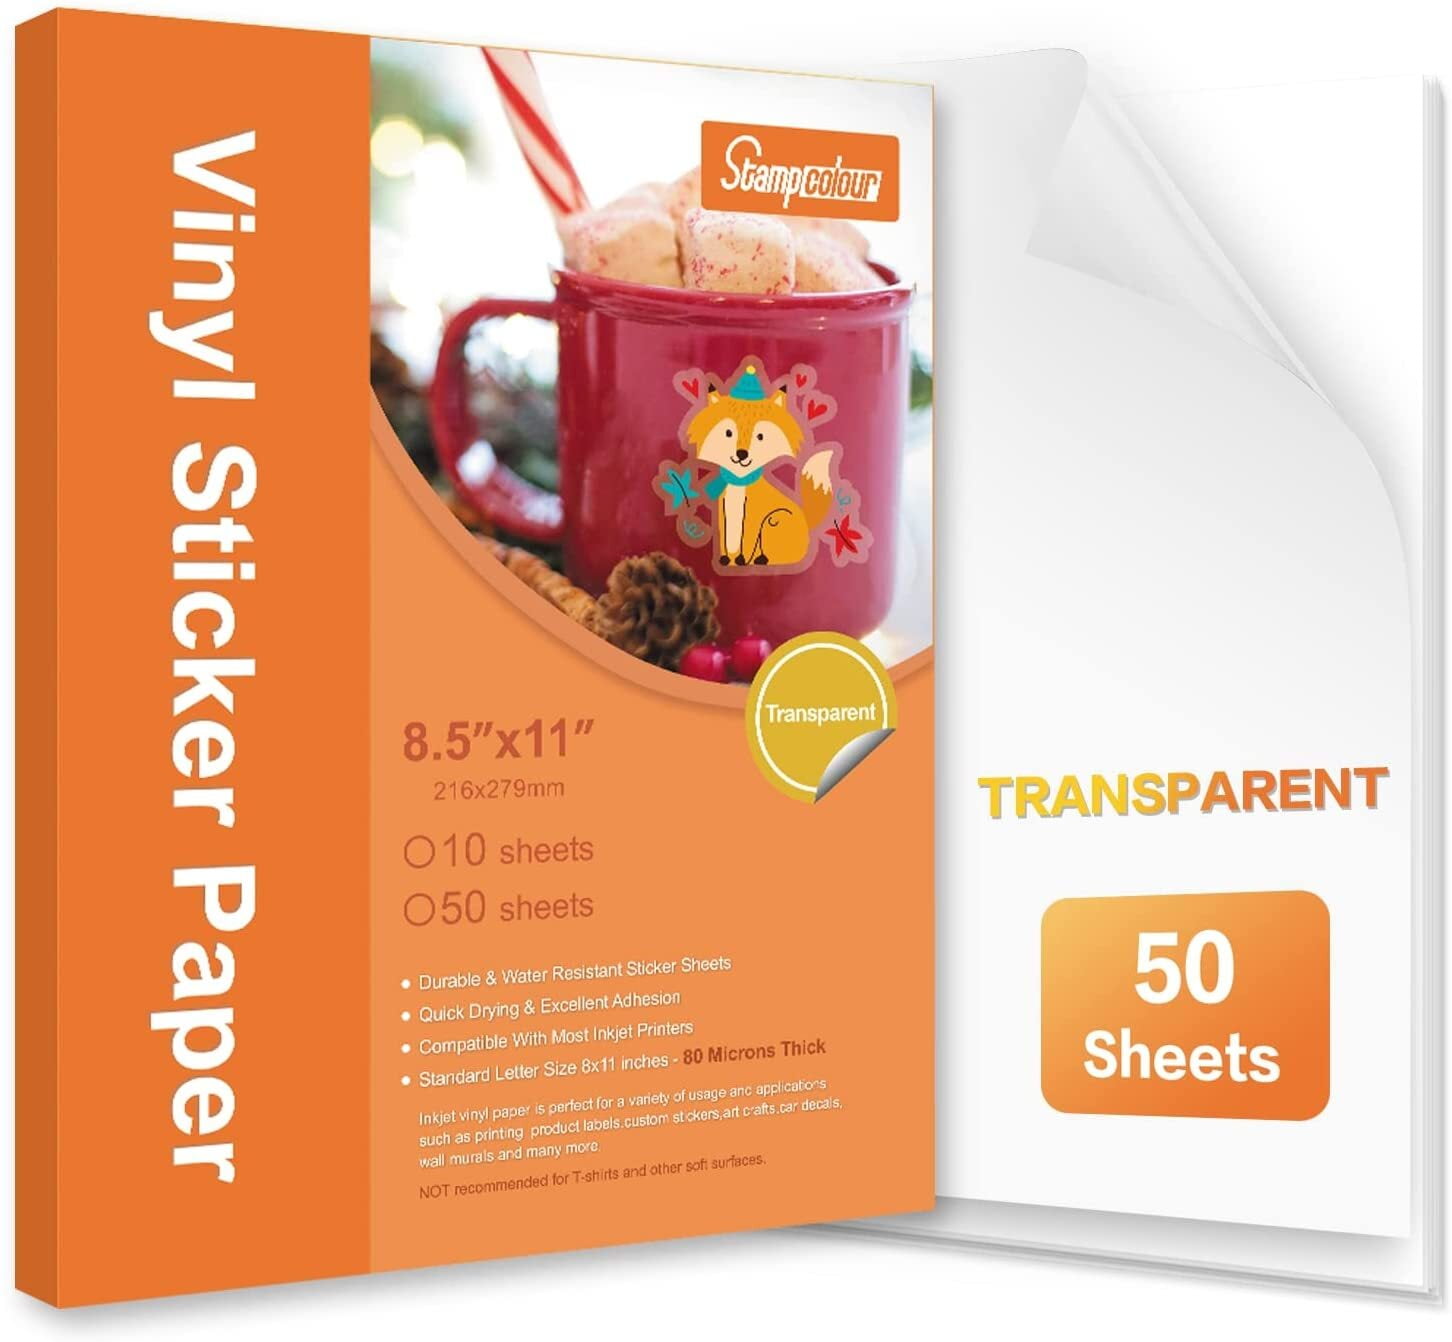 #  7 SHEETS A4 advertisementS FOR LAYOUT ON transparent SELF ADHESIVE sticker 